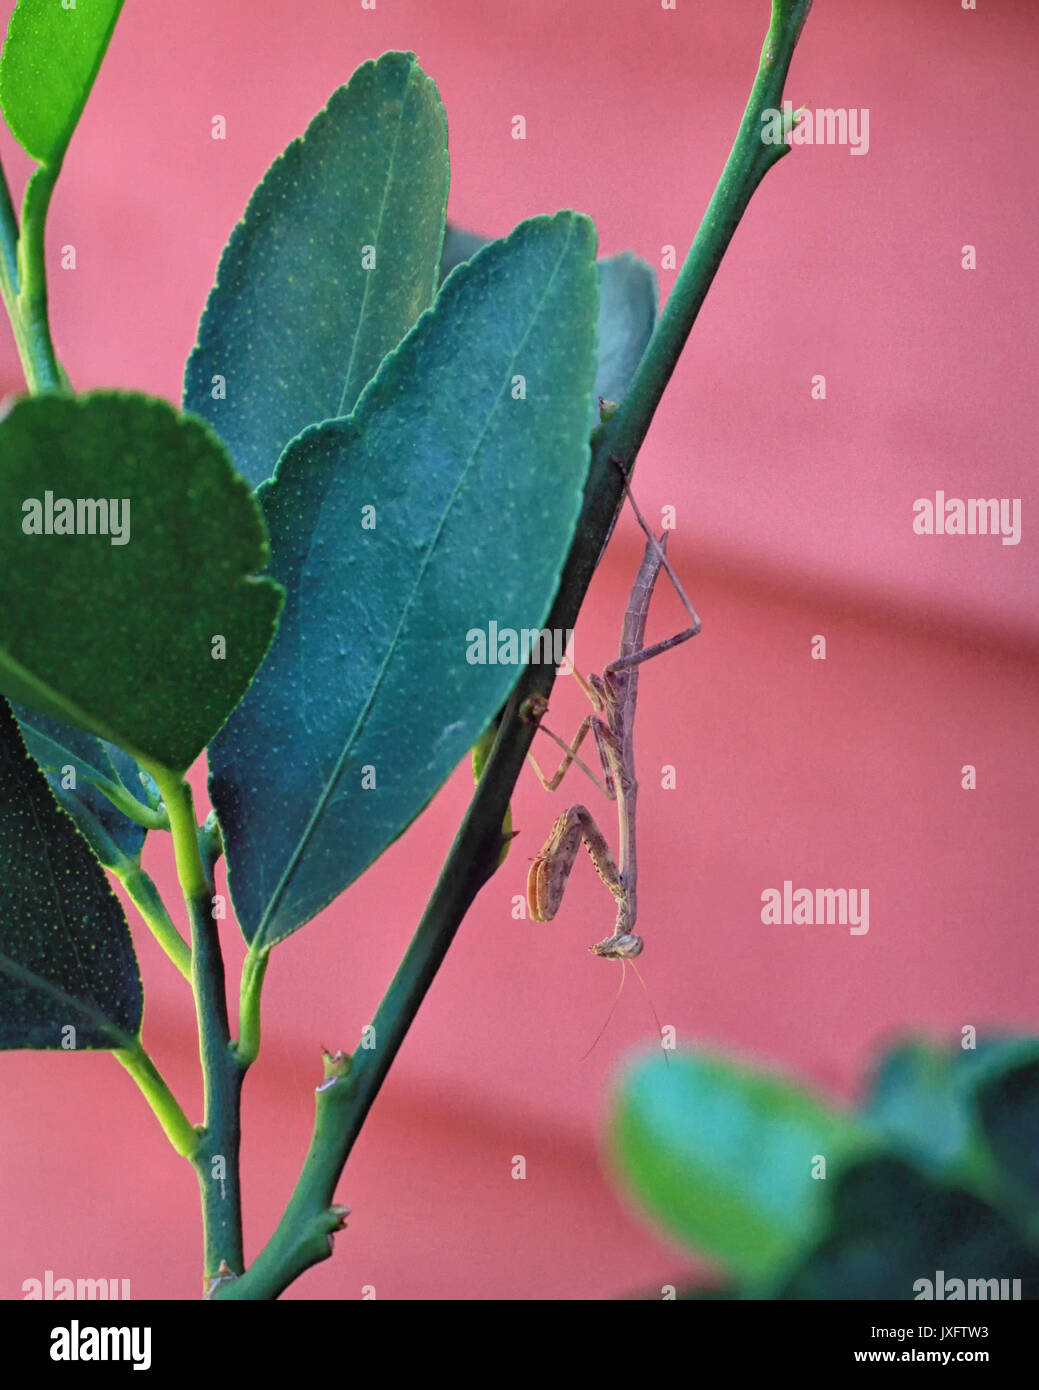 A young praying mantis hangs upside down from the branch of a lemon tree. Stock Photo